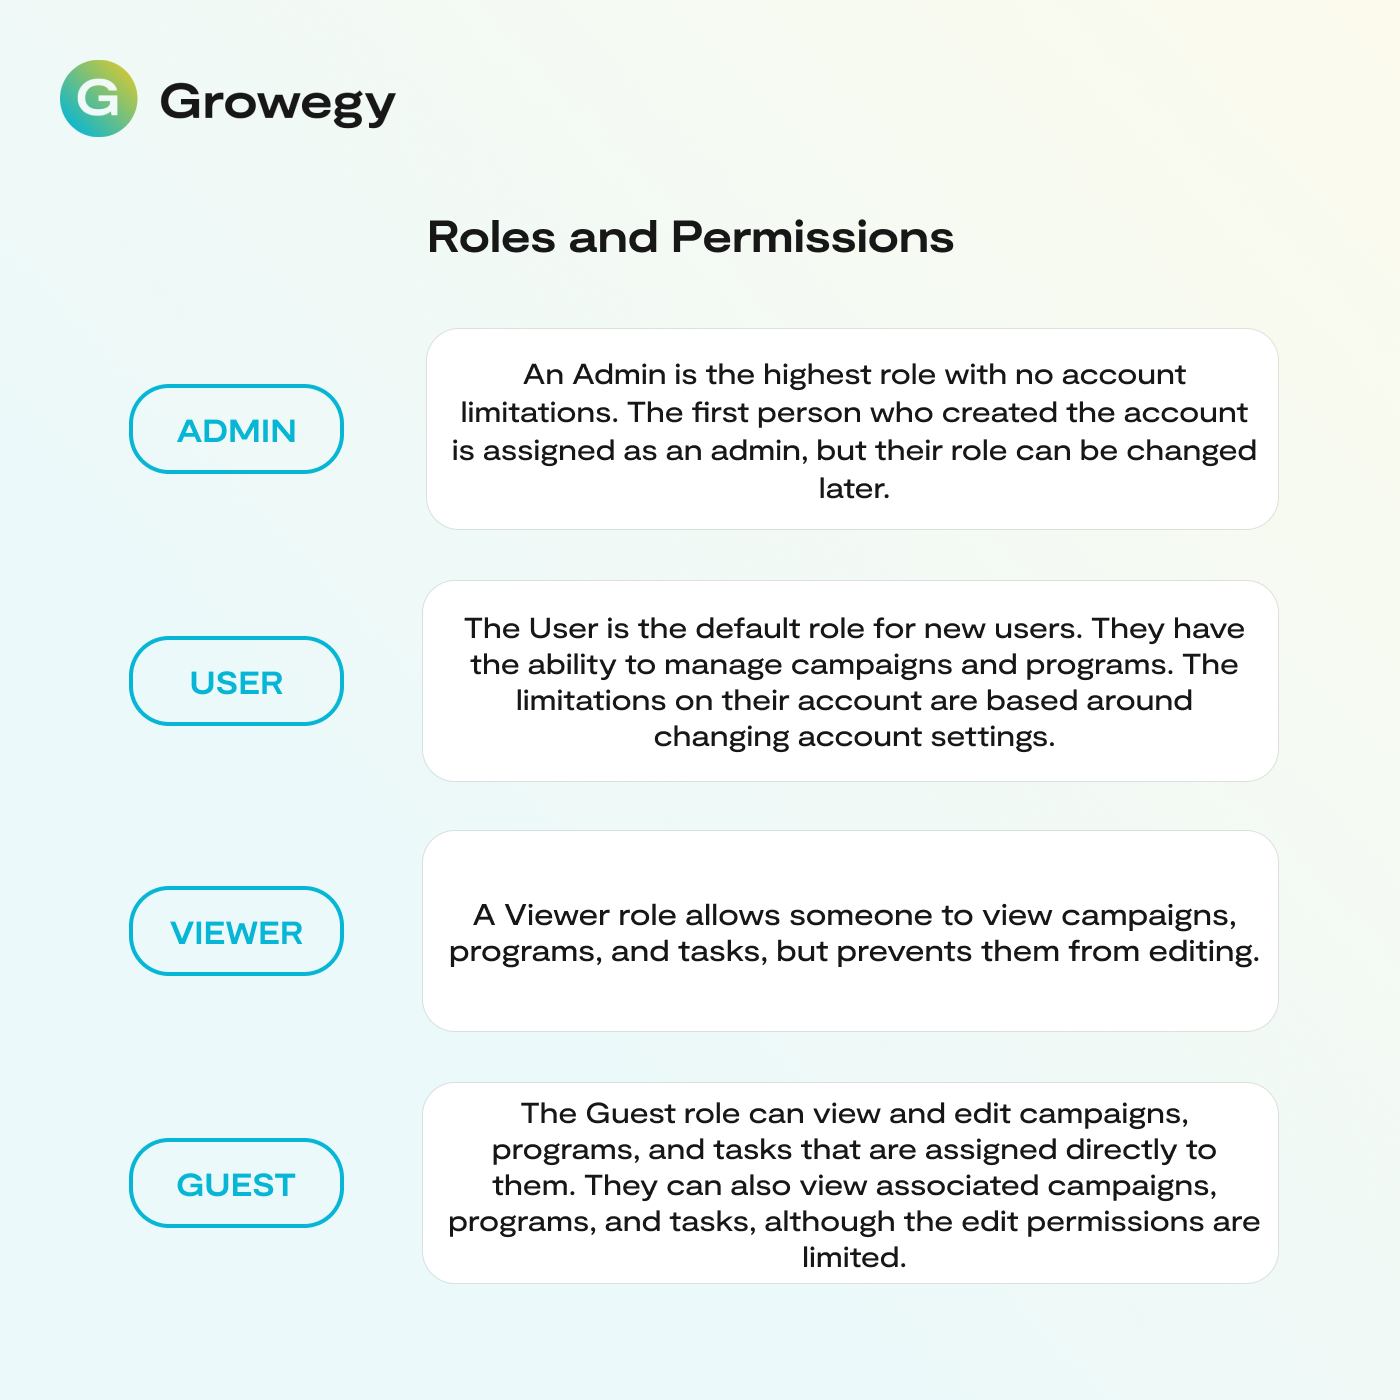 Roles and Permissions Growegy